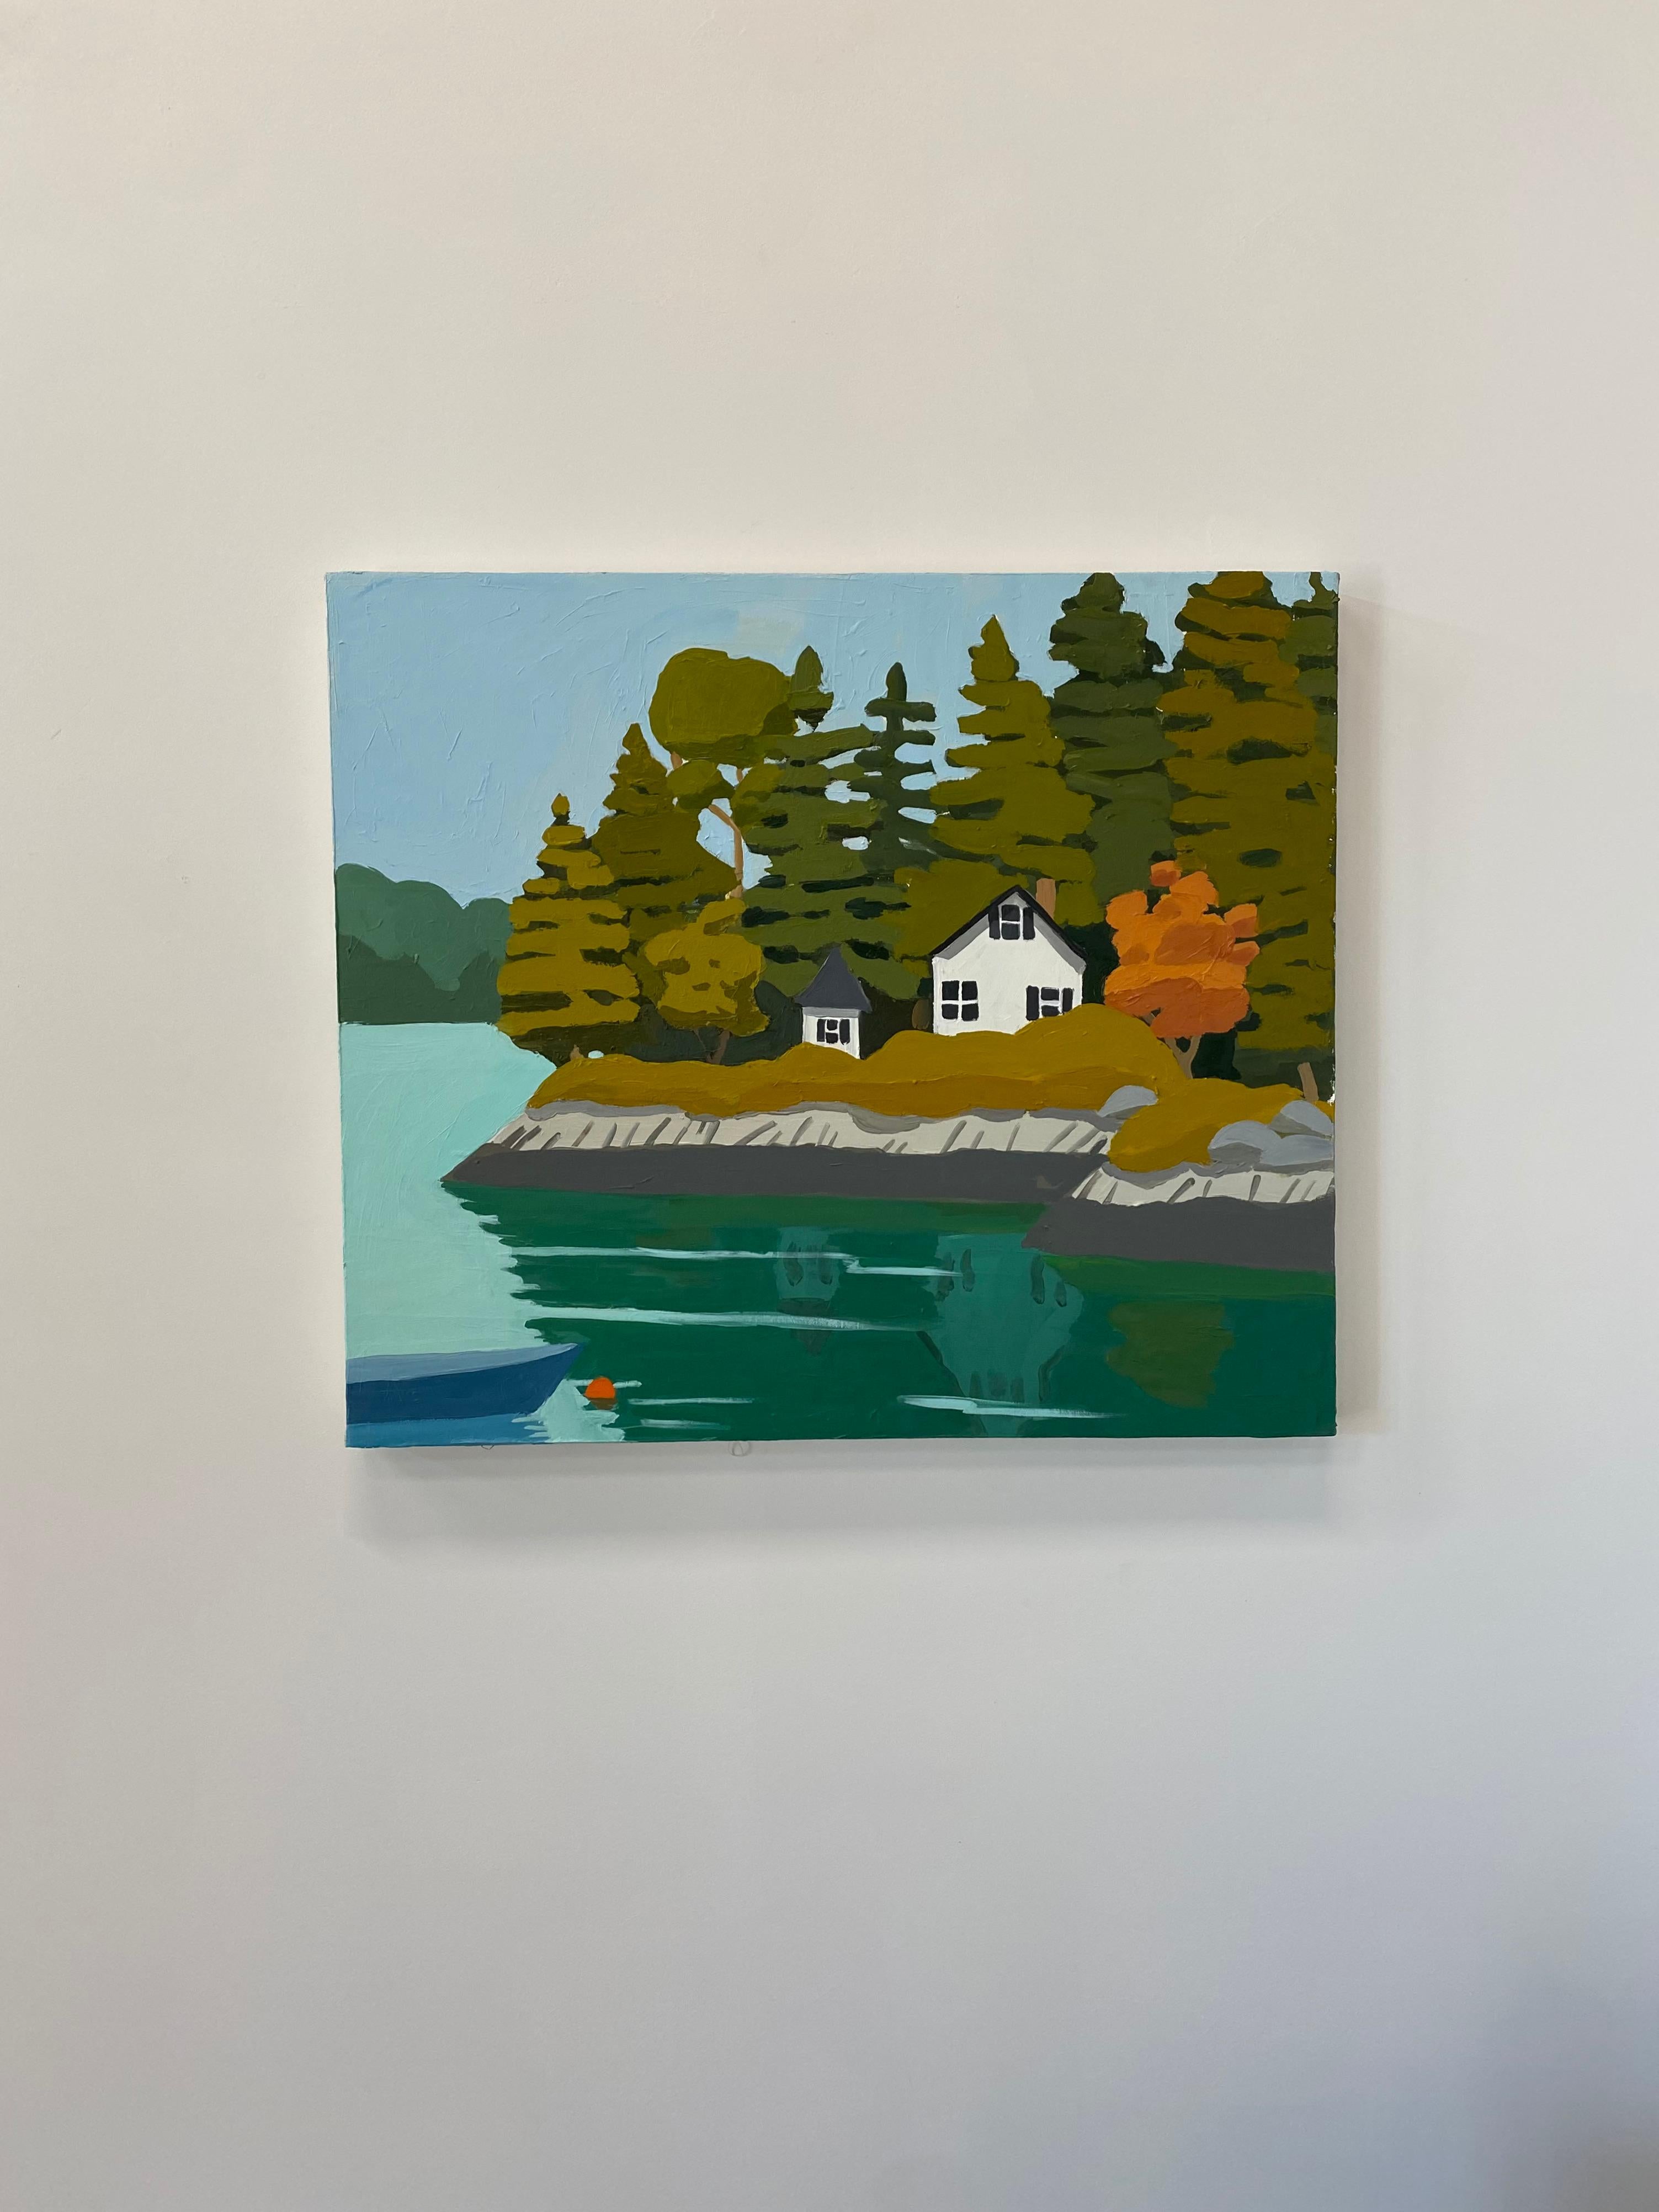 Sheep Island, Maine Landscape, Blue Water, Green Trees, White House on Shoreline - Painting by Sophie Treppendahl